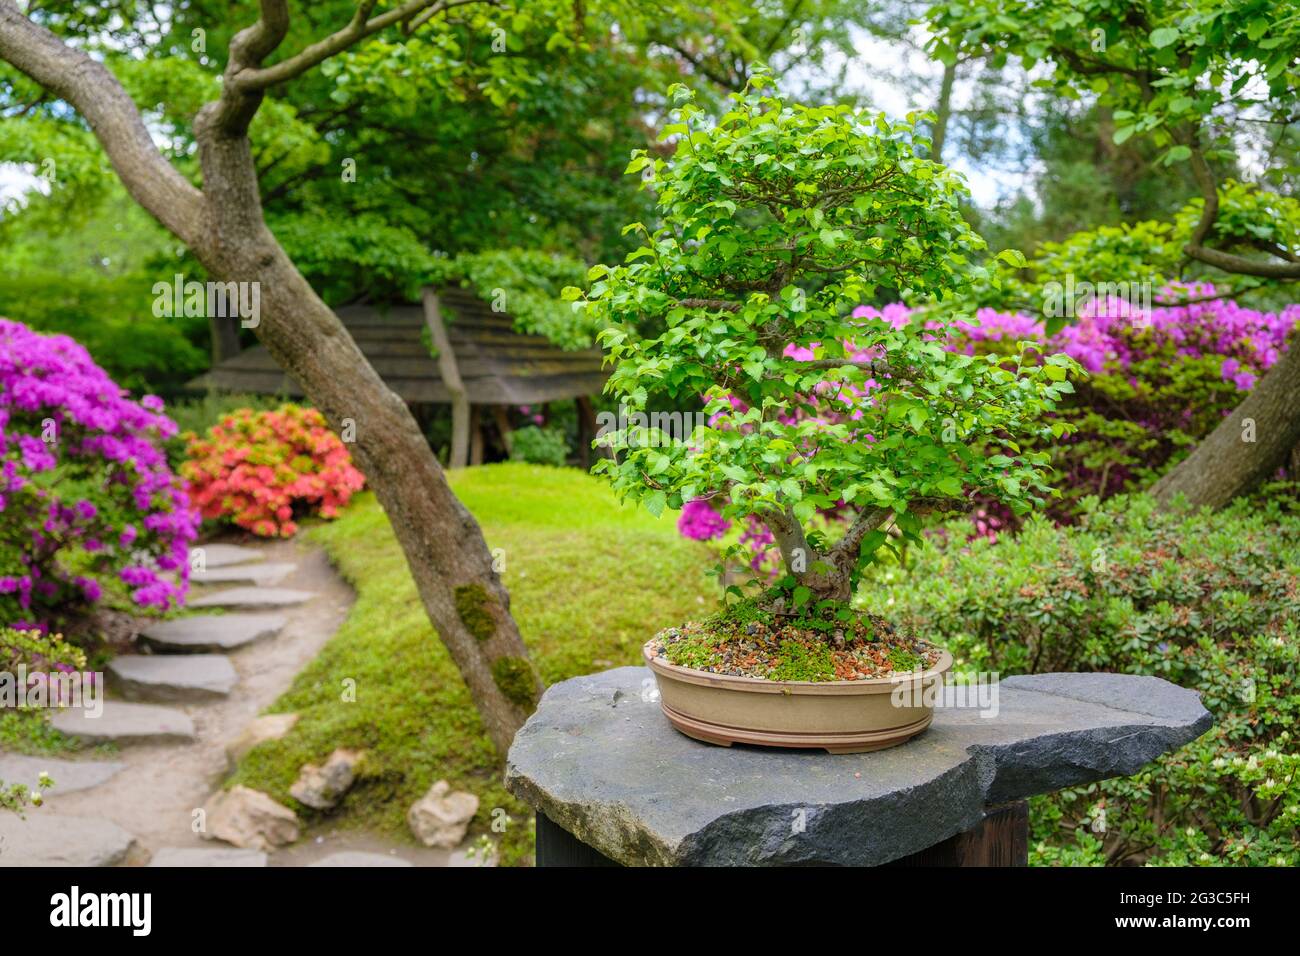 Japanese garden with bonsai tree and pink rhododendrons bushes Stock Photo